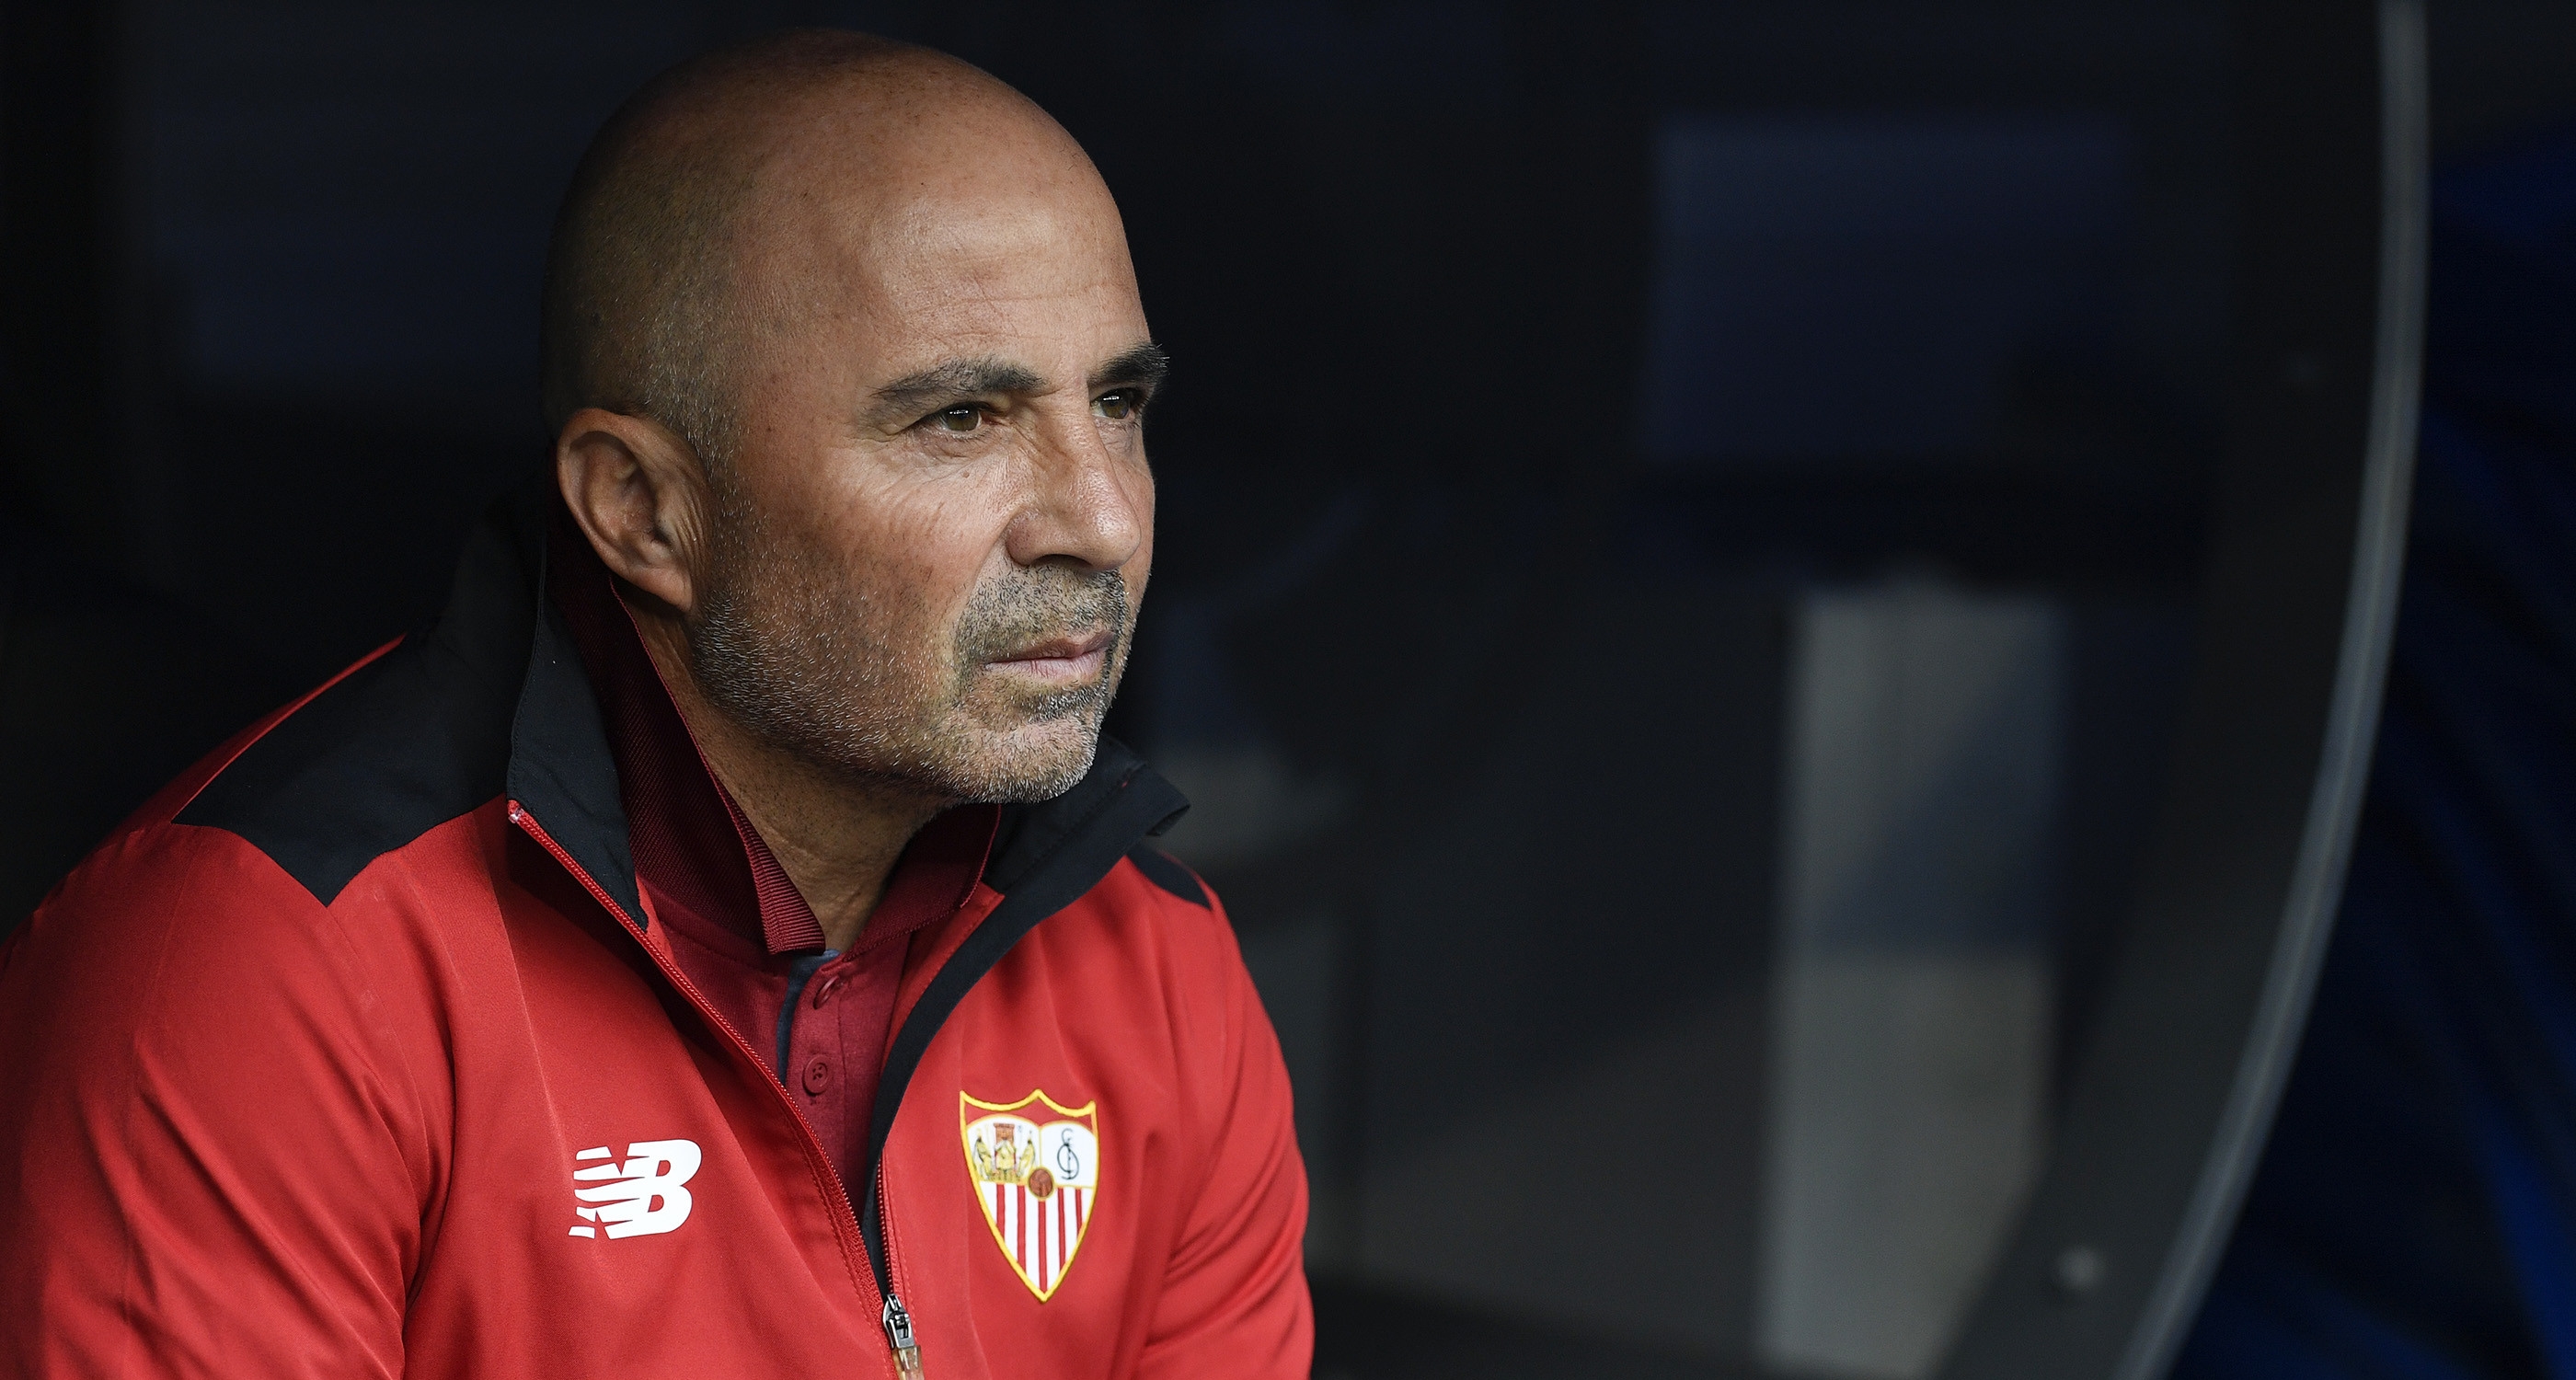 Sampaoli during the match against Real Madrid 